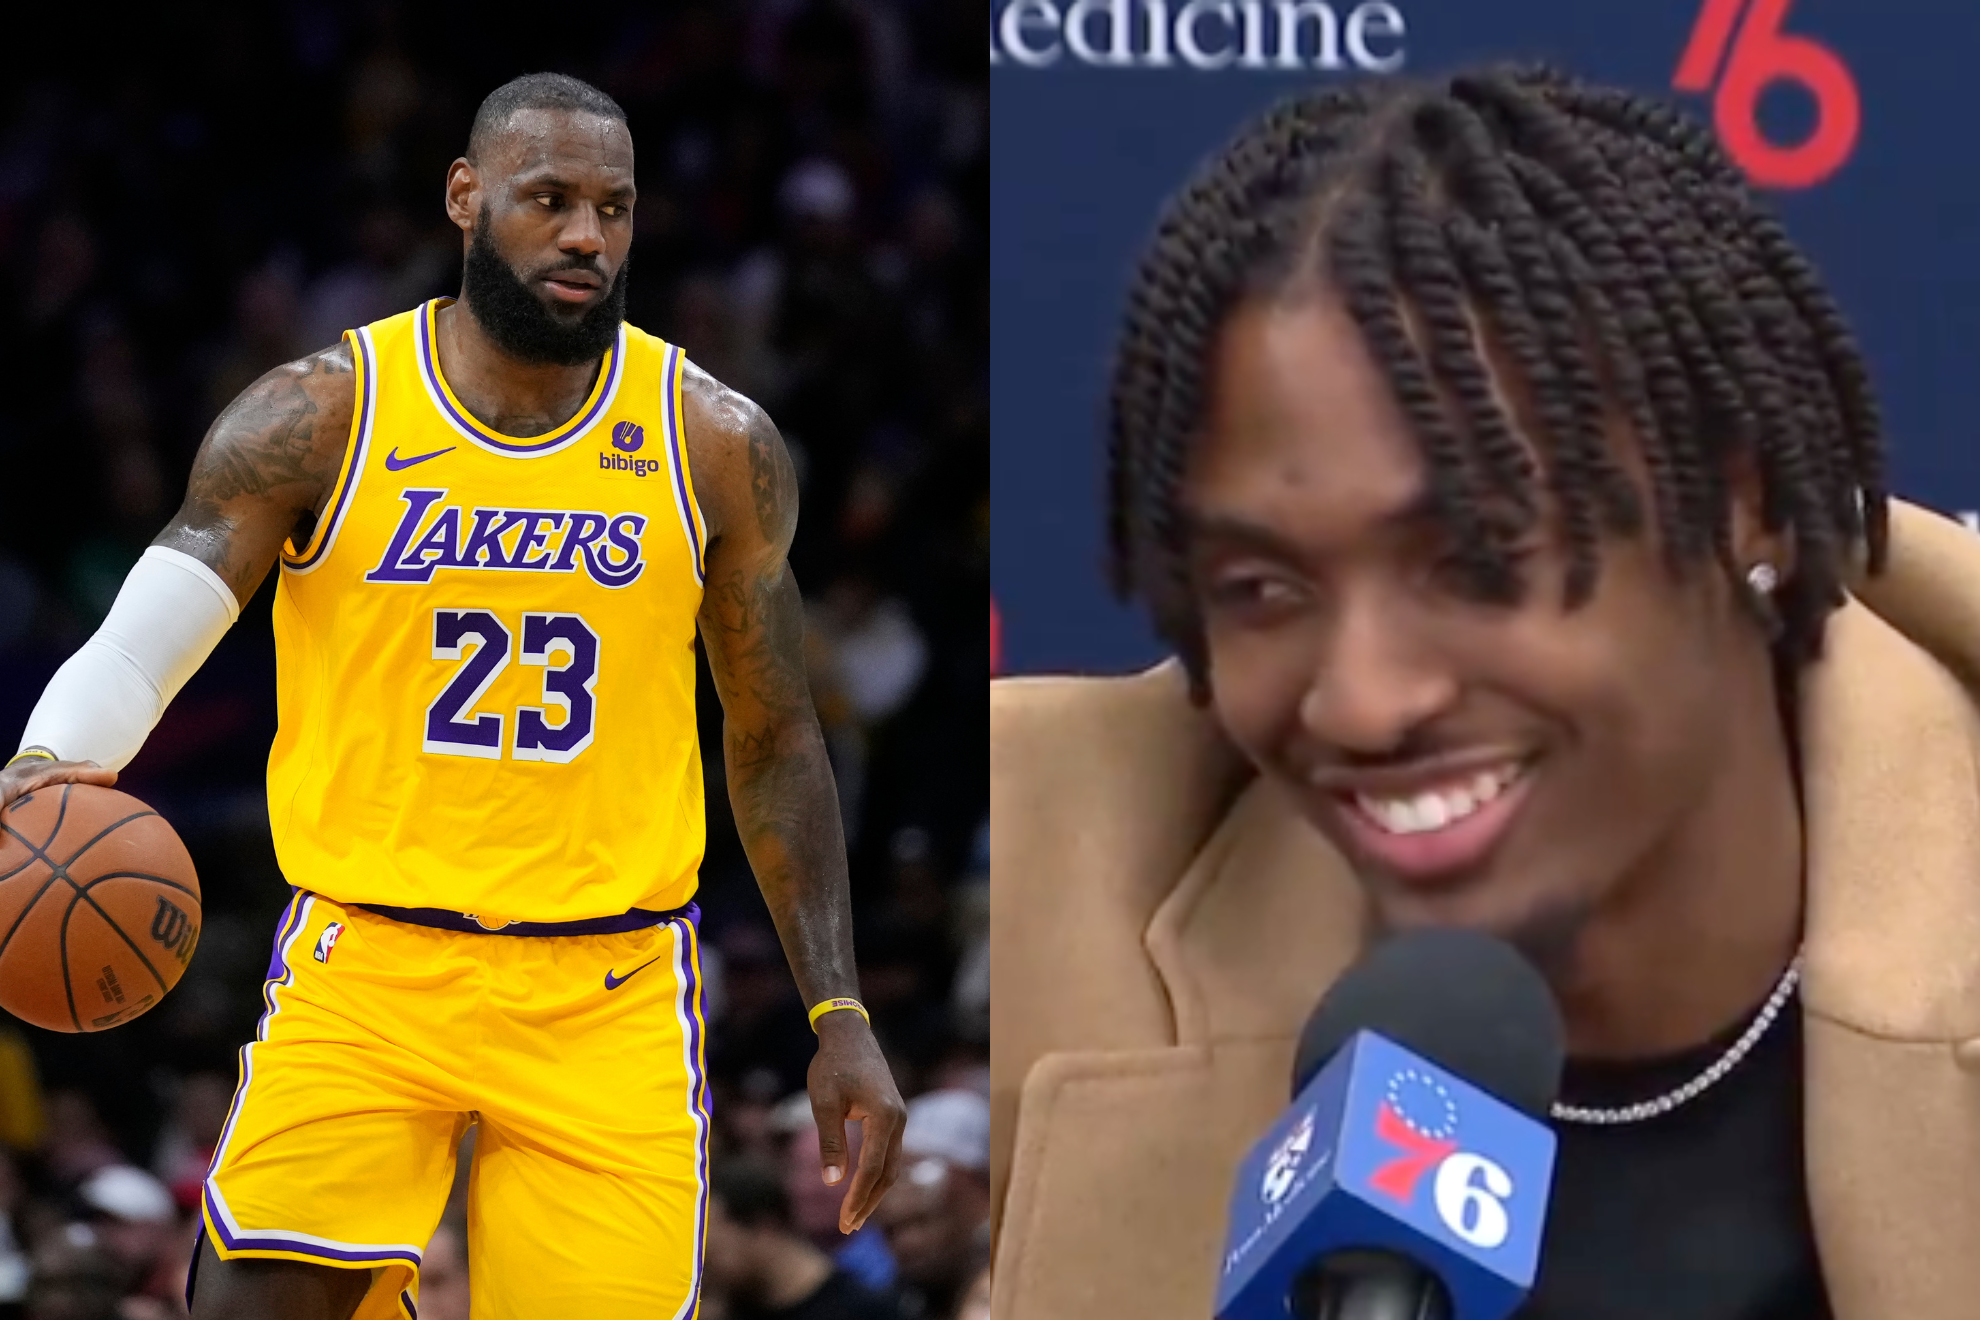 LeBron James and Tyrese Maxey battled on Monday night.